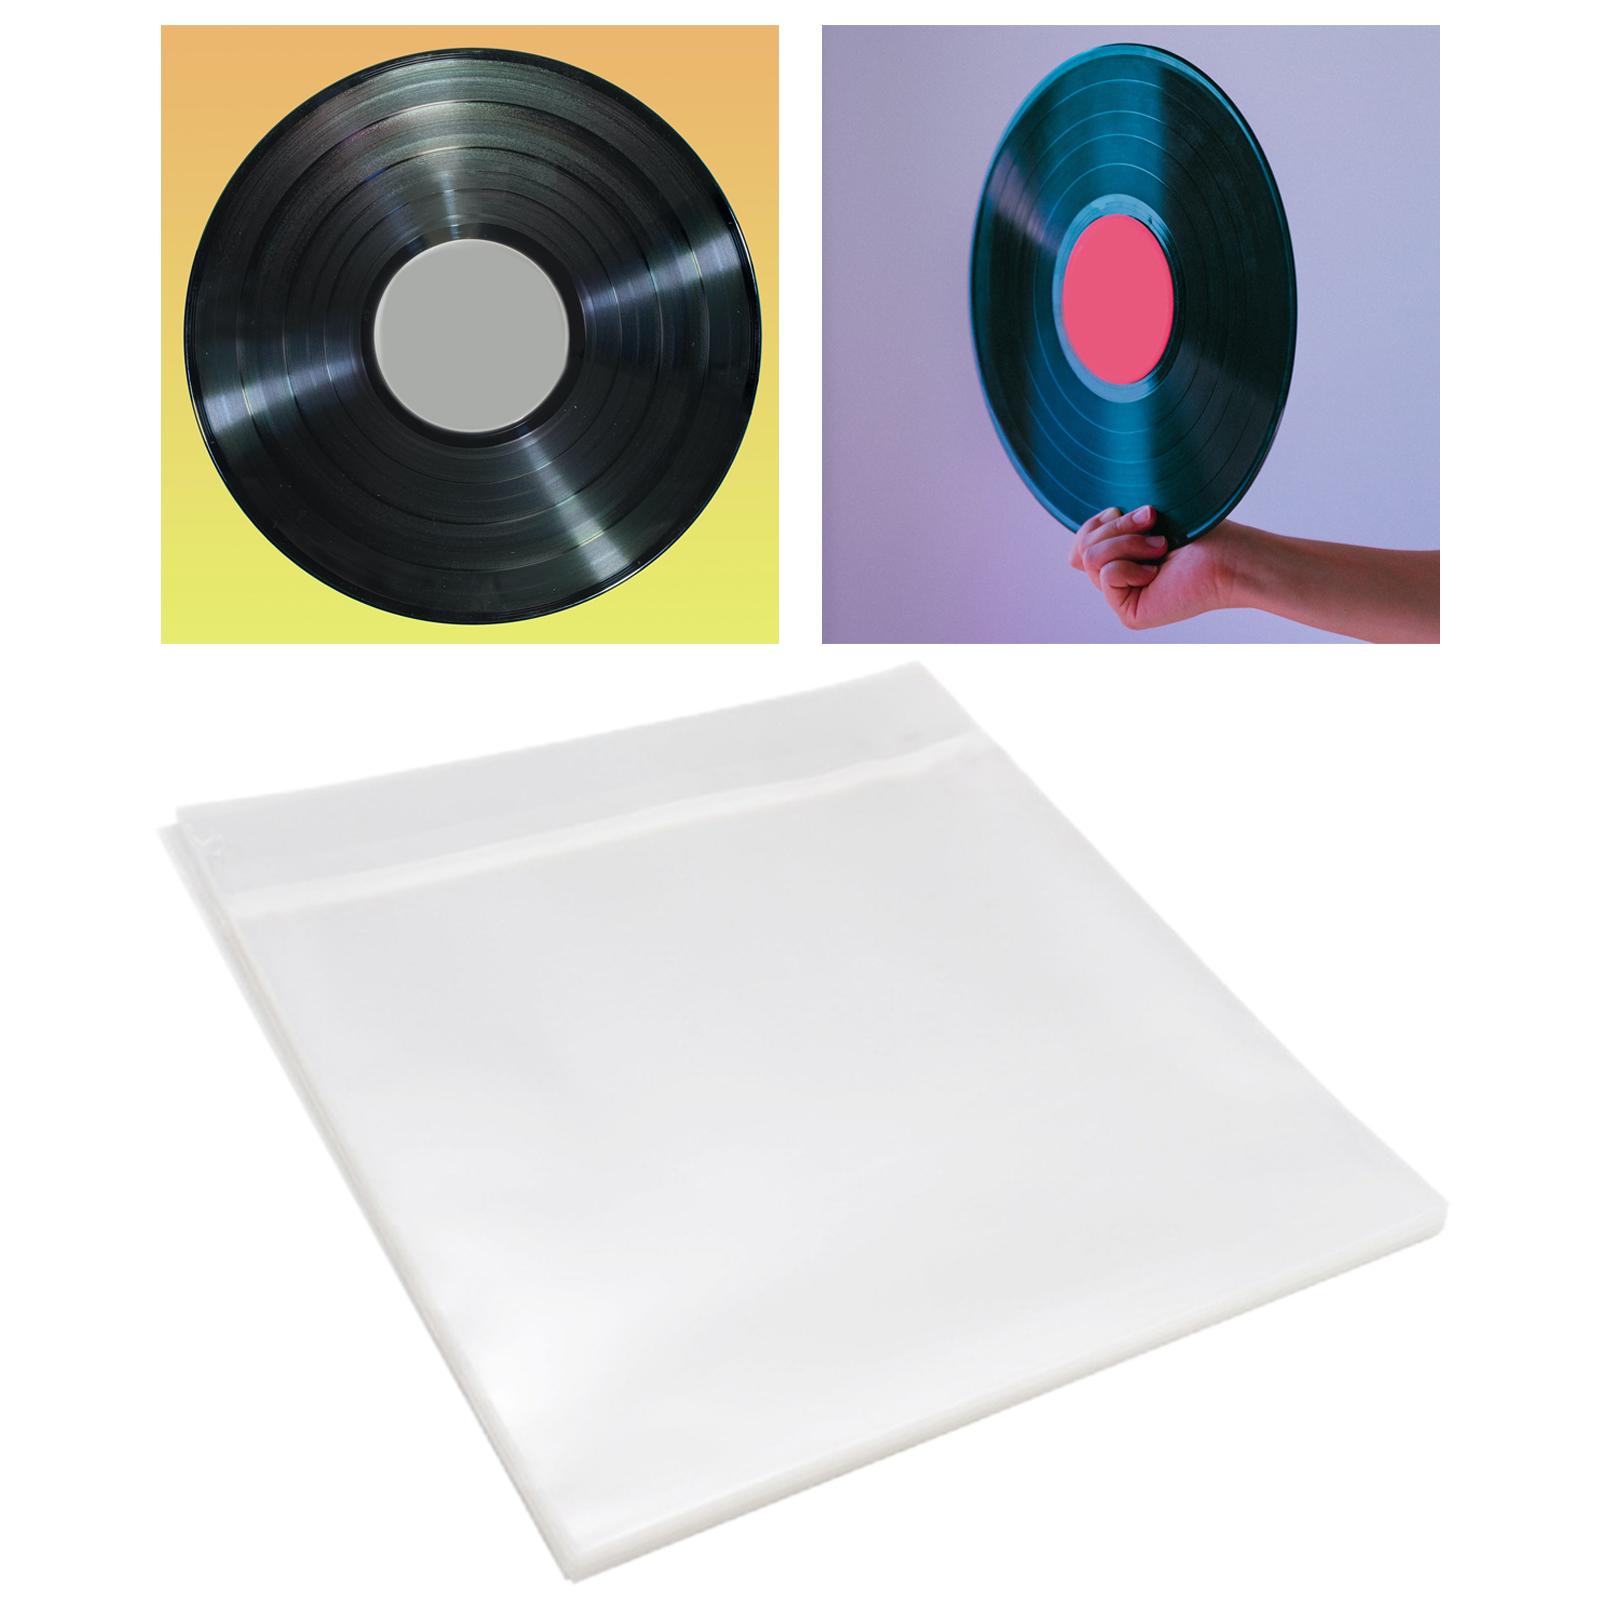 50Pcs Vinyl Record Sleeves Records Bag Reusable Clear for Turntable Player 12inch Single Record